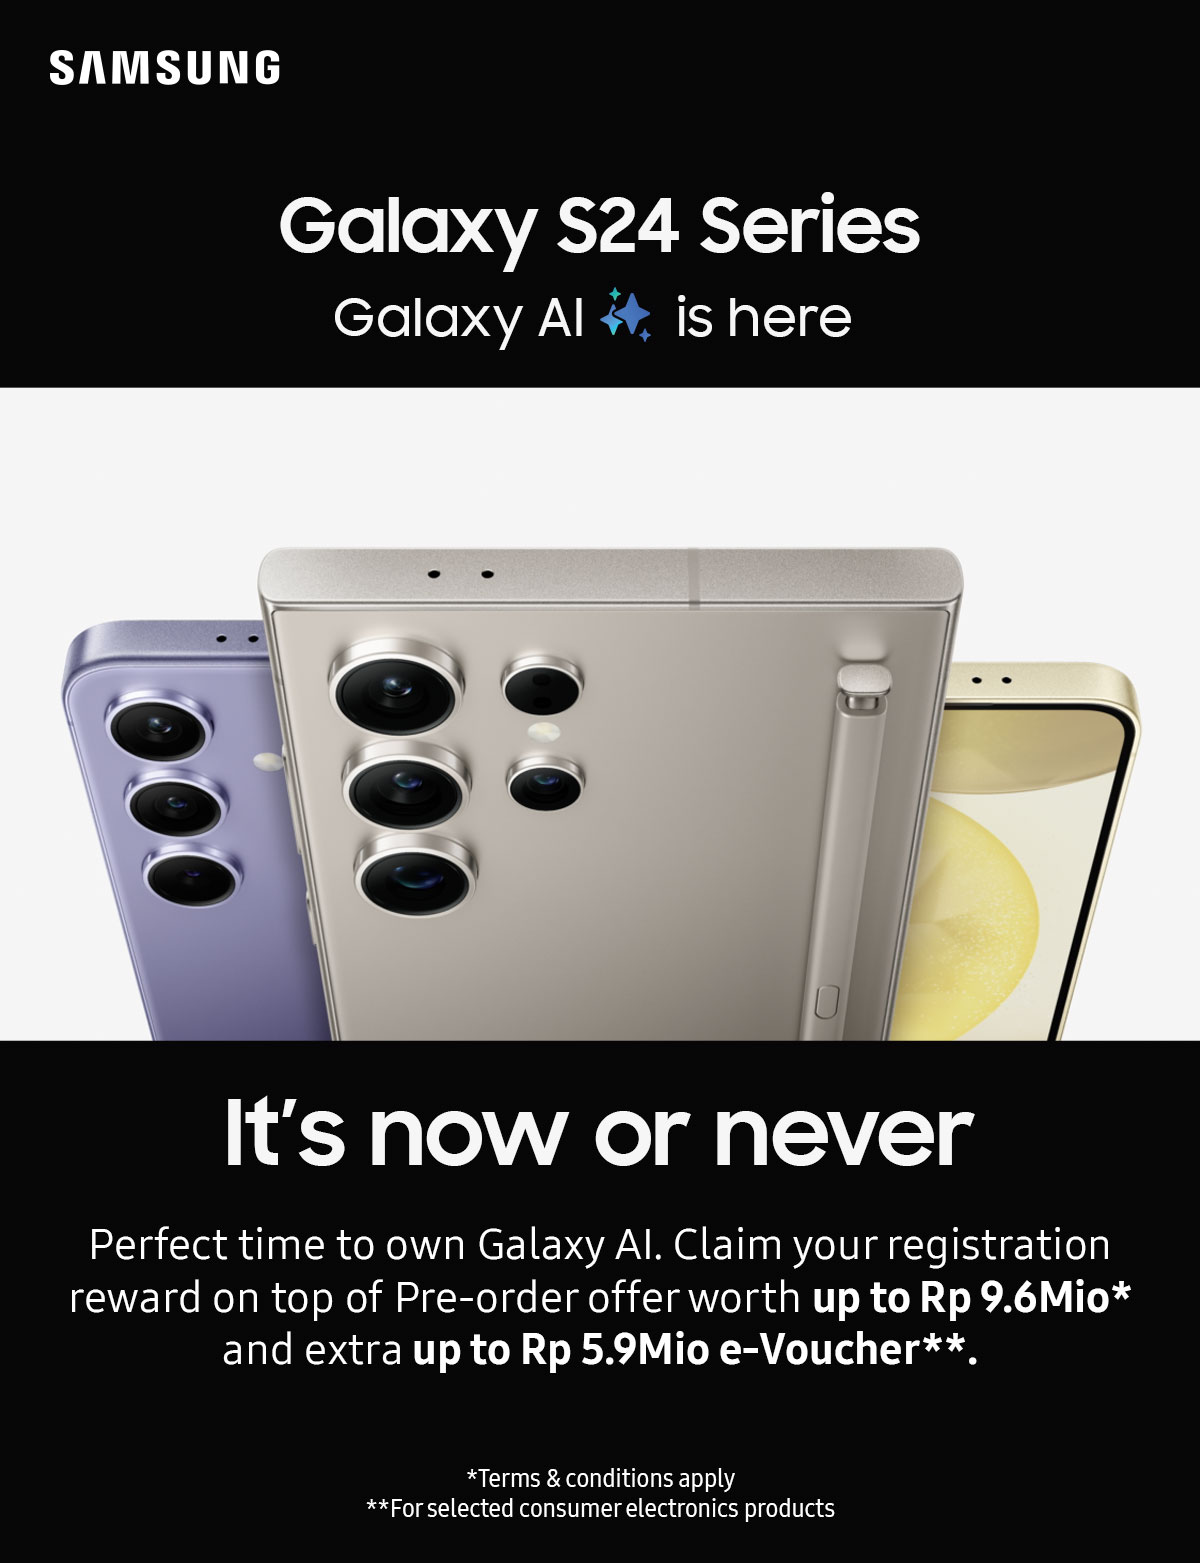 It's now or never | Perfect time to own Galaxy Al. Claim your registration reward on top of Pre-order offer worth up to Rp 9.6Mio and extra up to Rp 5.9Mio e-Voucher.